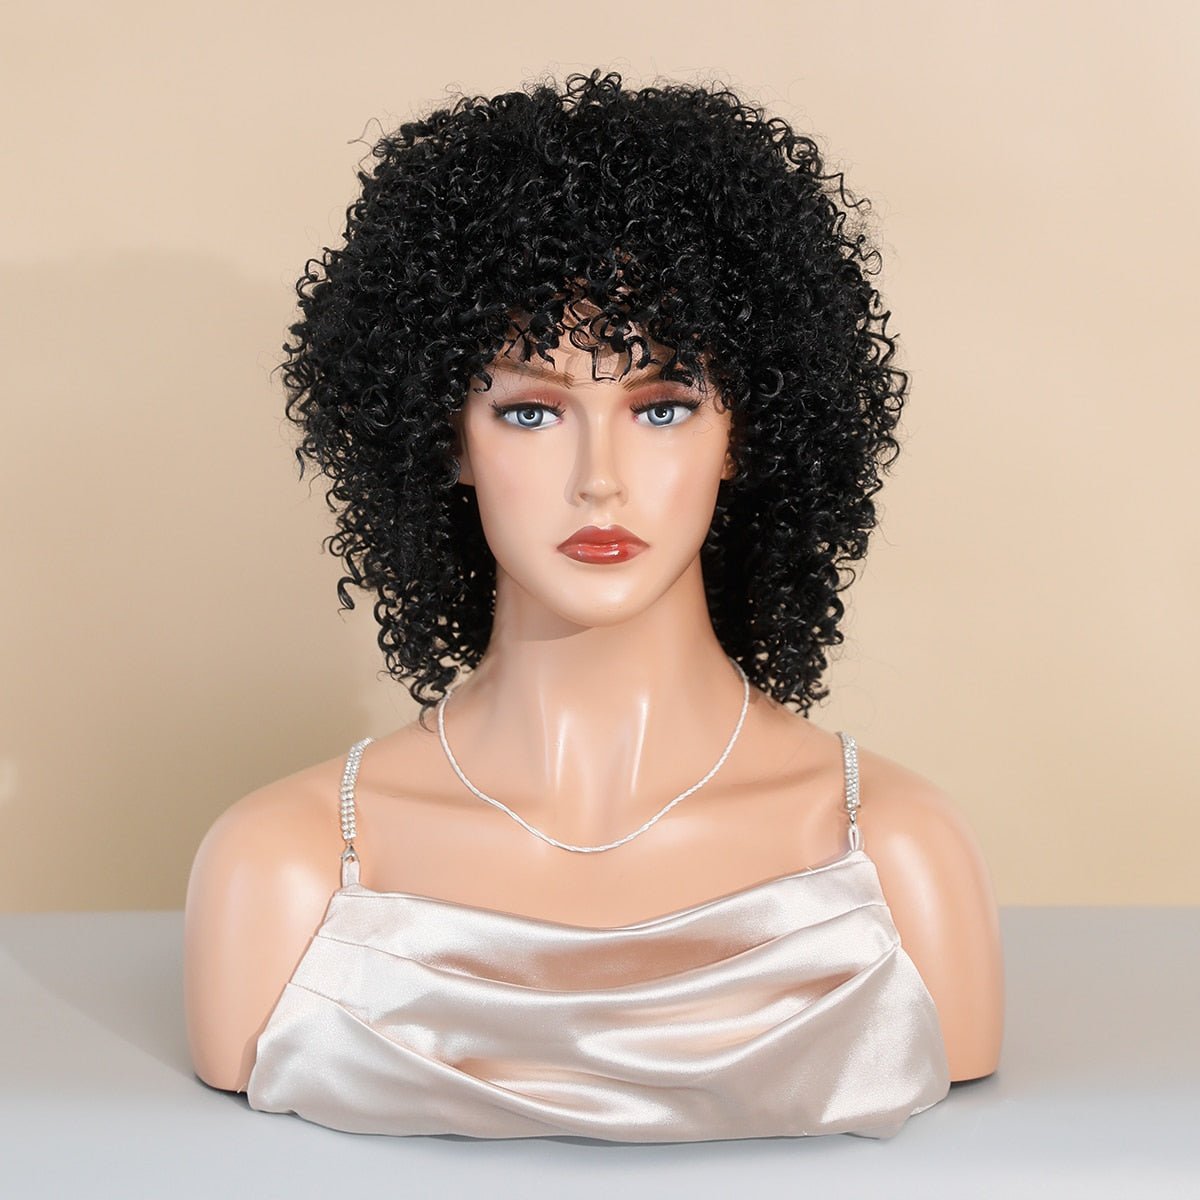 Black Short Curly Synthetic Wig with Bangs - HairNjoy